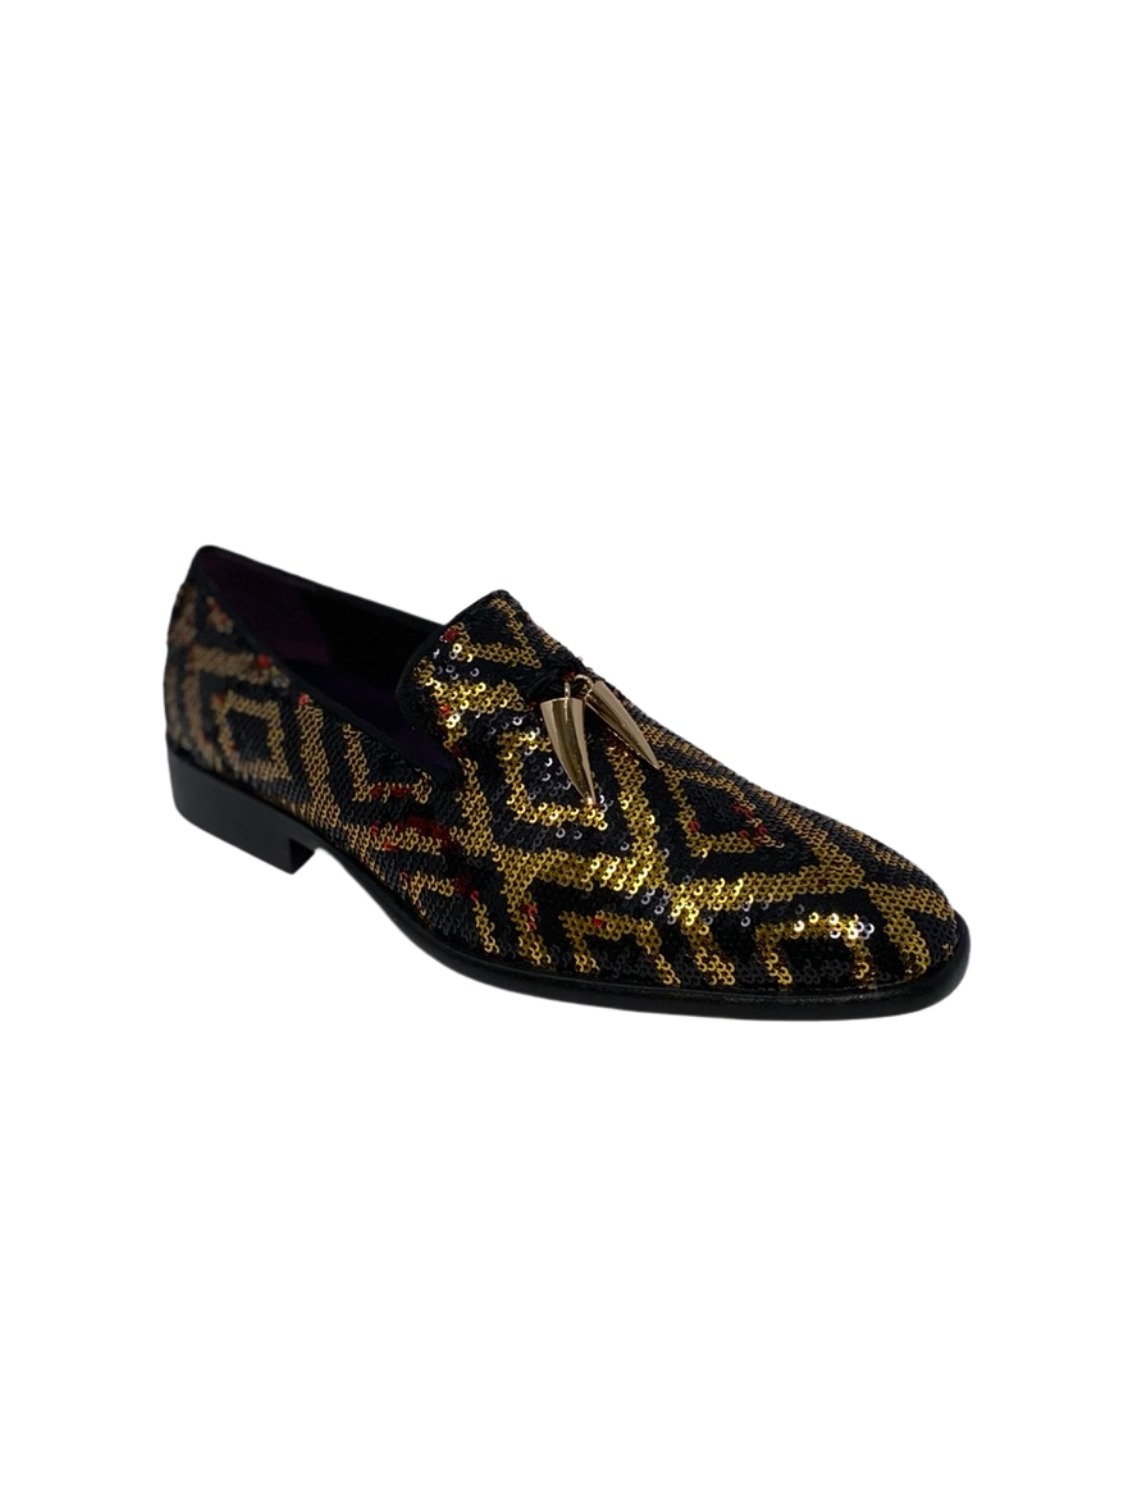 After Midnight Black and Gold Sequin Formal Loafer